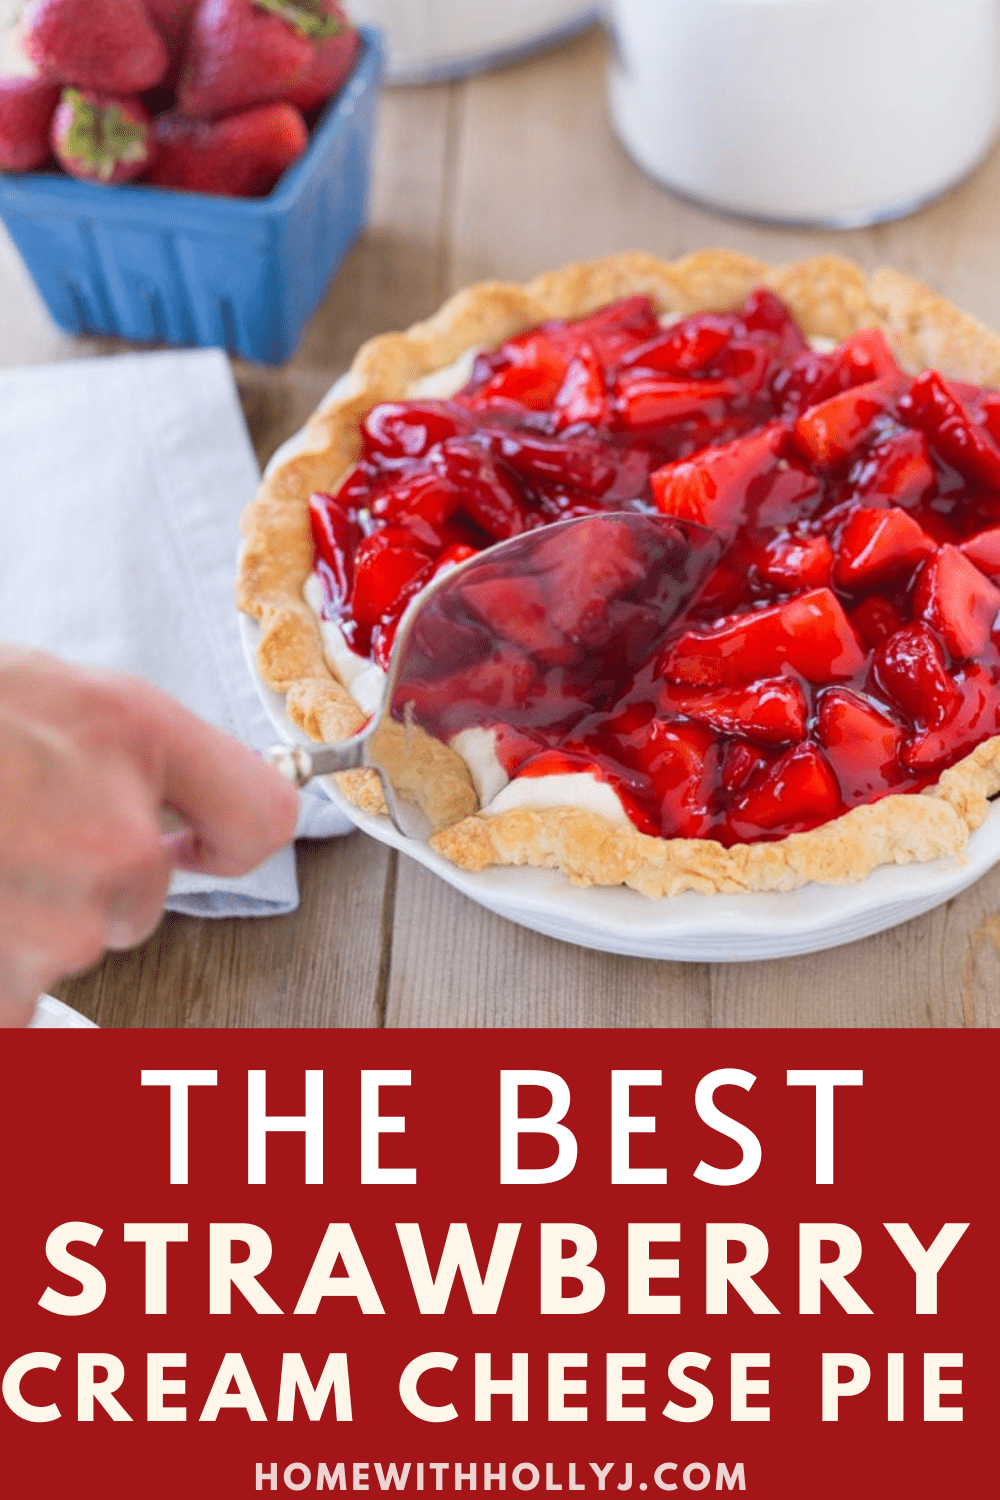 Sharing the best strawberry pie recipe with cream cheese filling. It is one of the tastiest desserts thanks to Grandma's recipe.